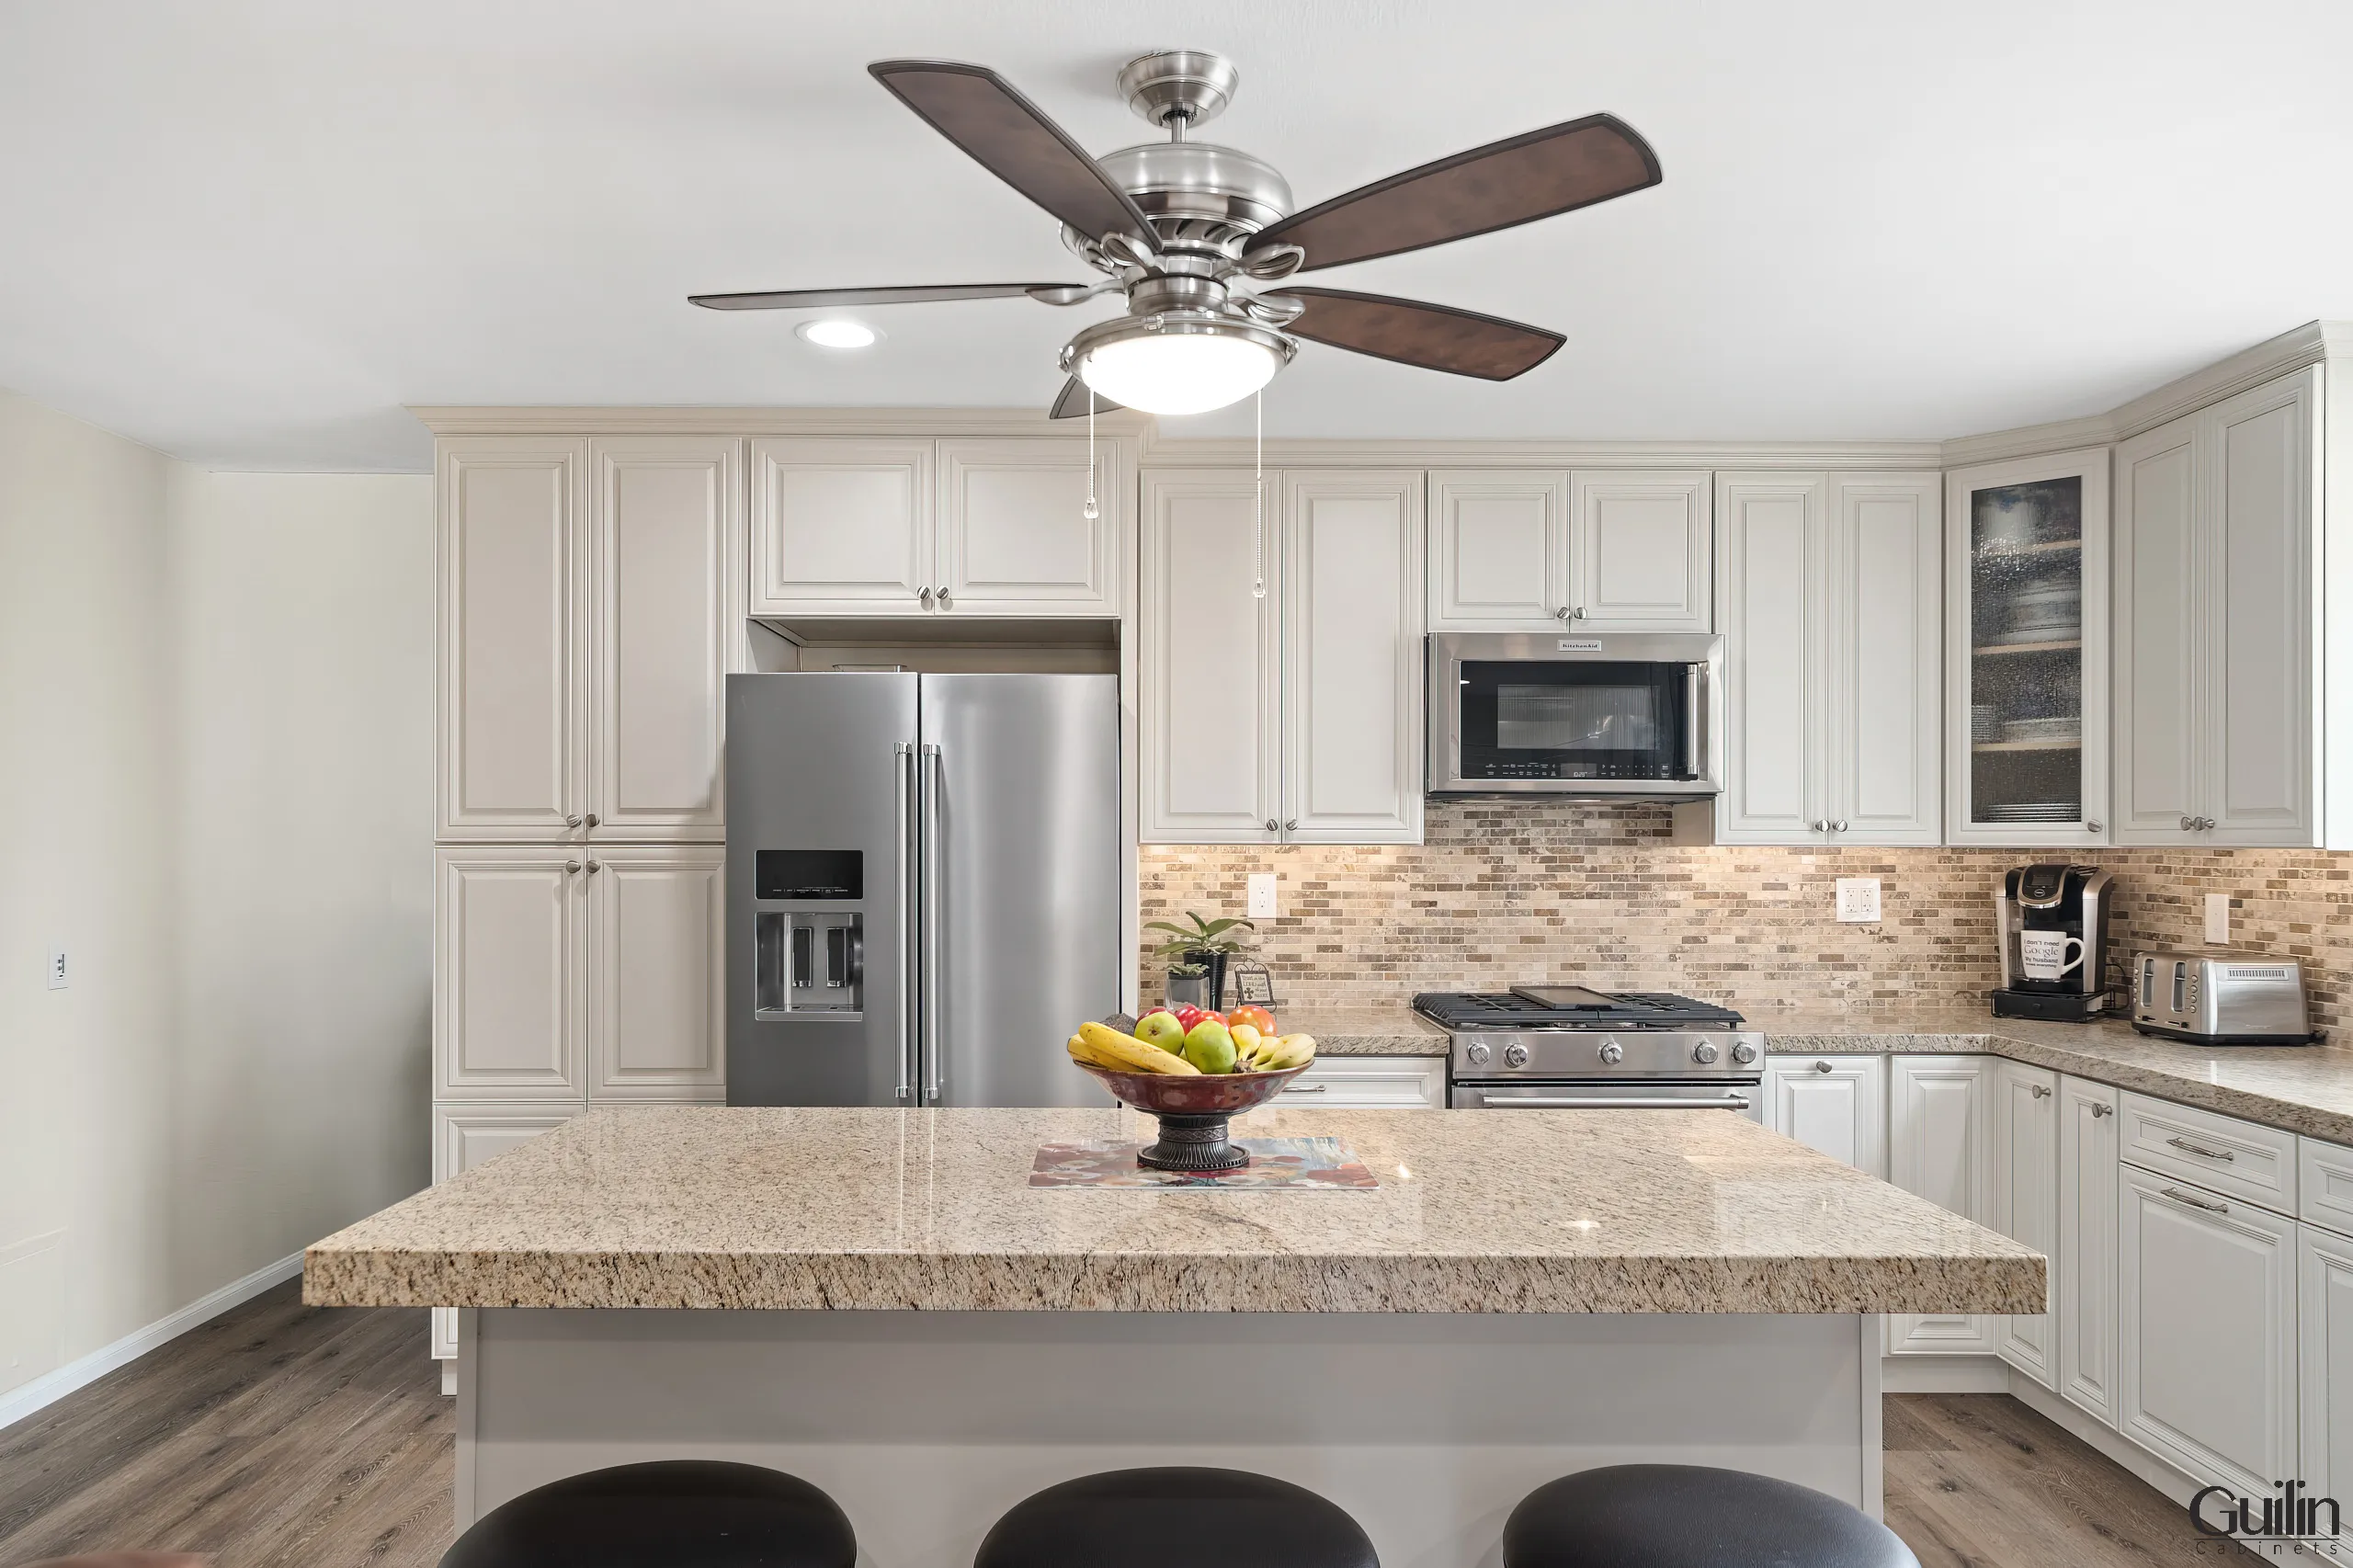 Granite countertops can be a major selling point as well as help Increase our home value.